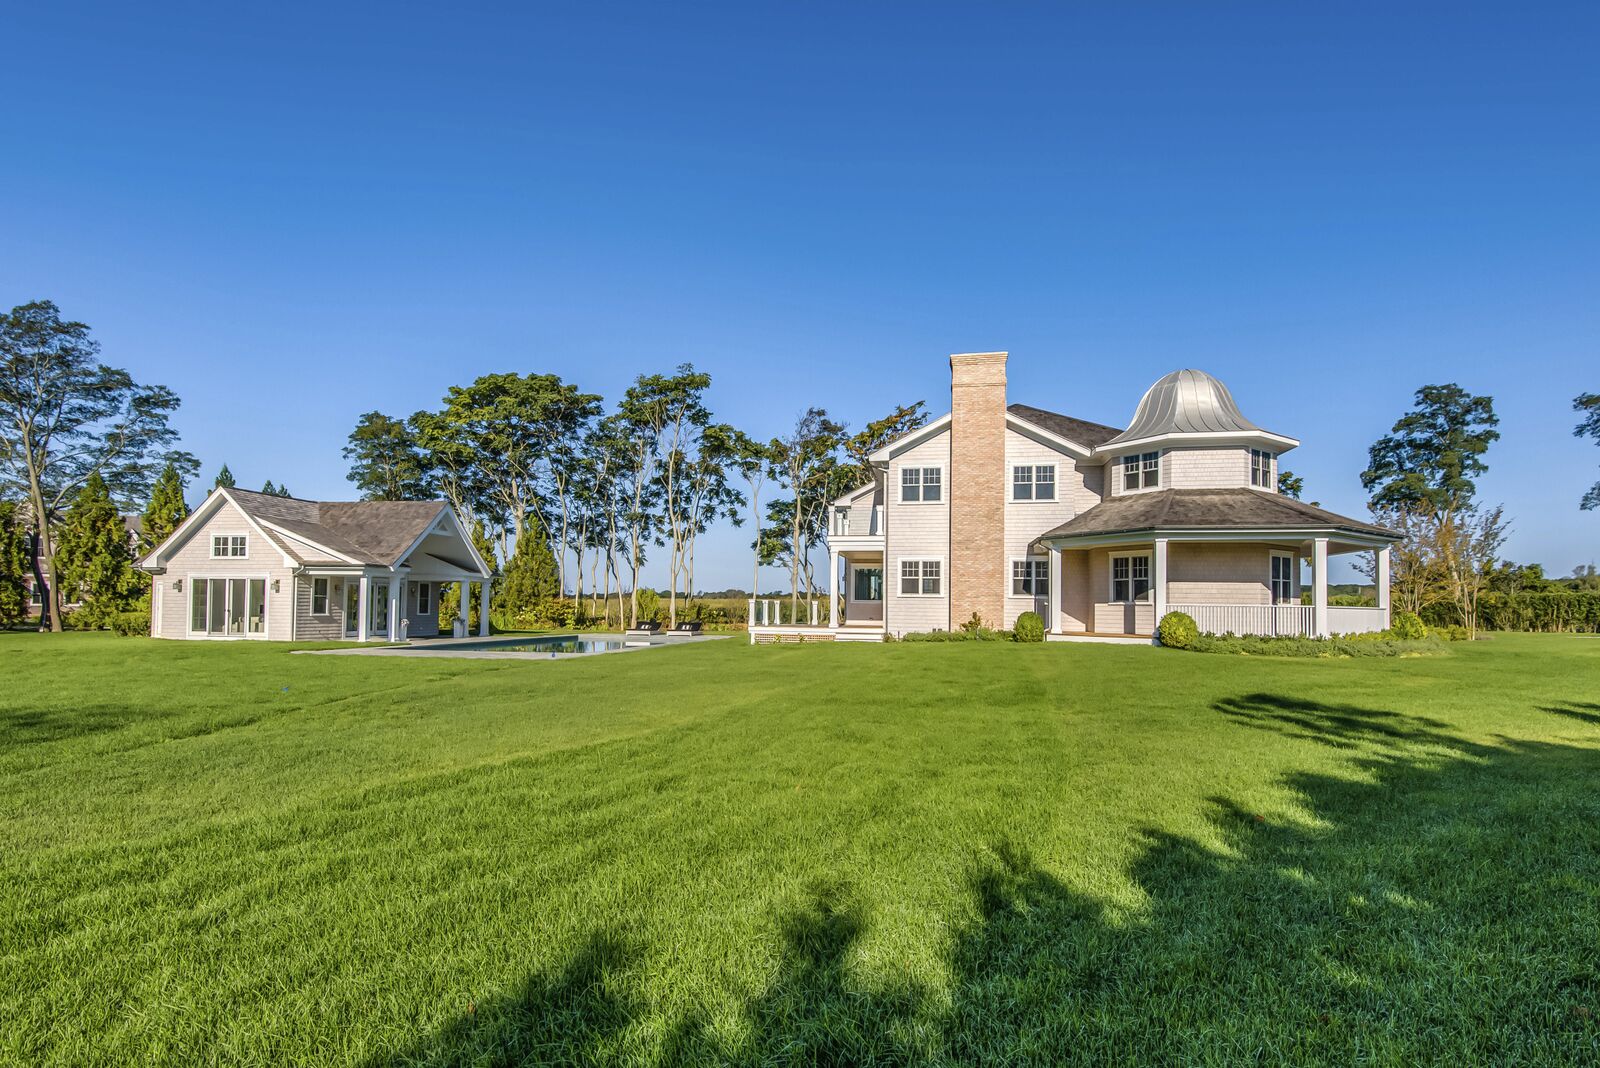 475 David Whites Ln, Southampton, NY 11968 is offered at $5,975,000 by The AVIGDOR / PENKOVA Team